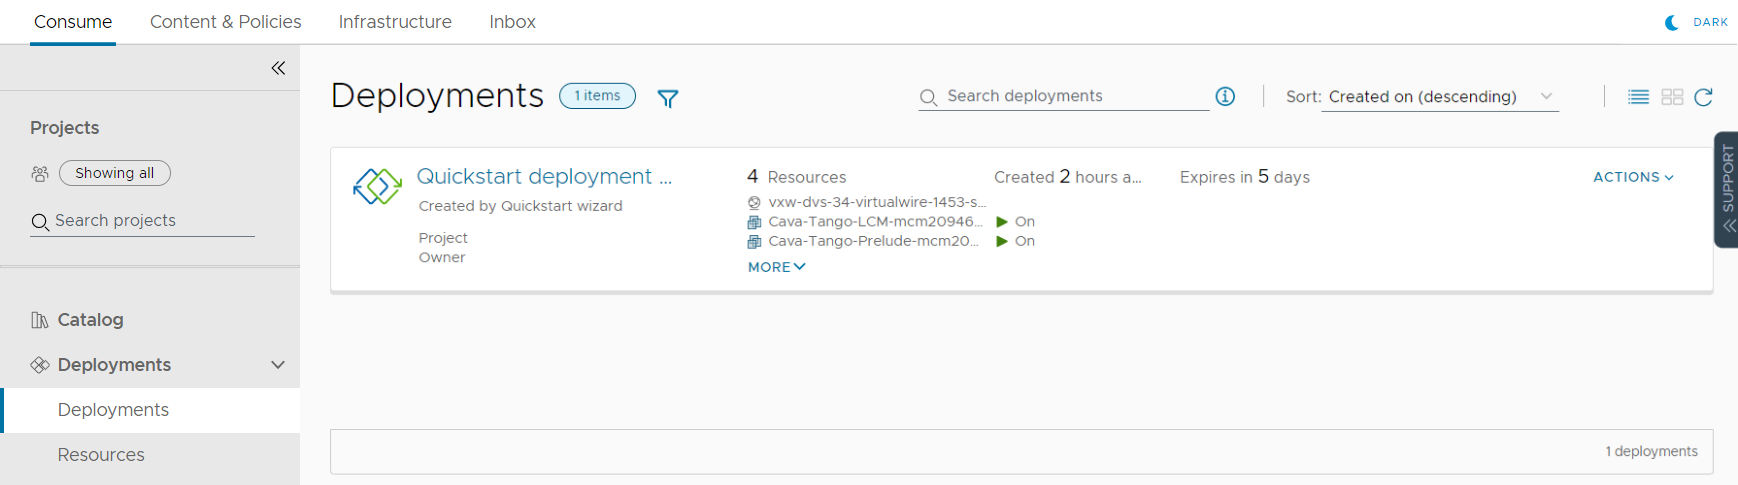 Deployment provisioned by the Quickstart